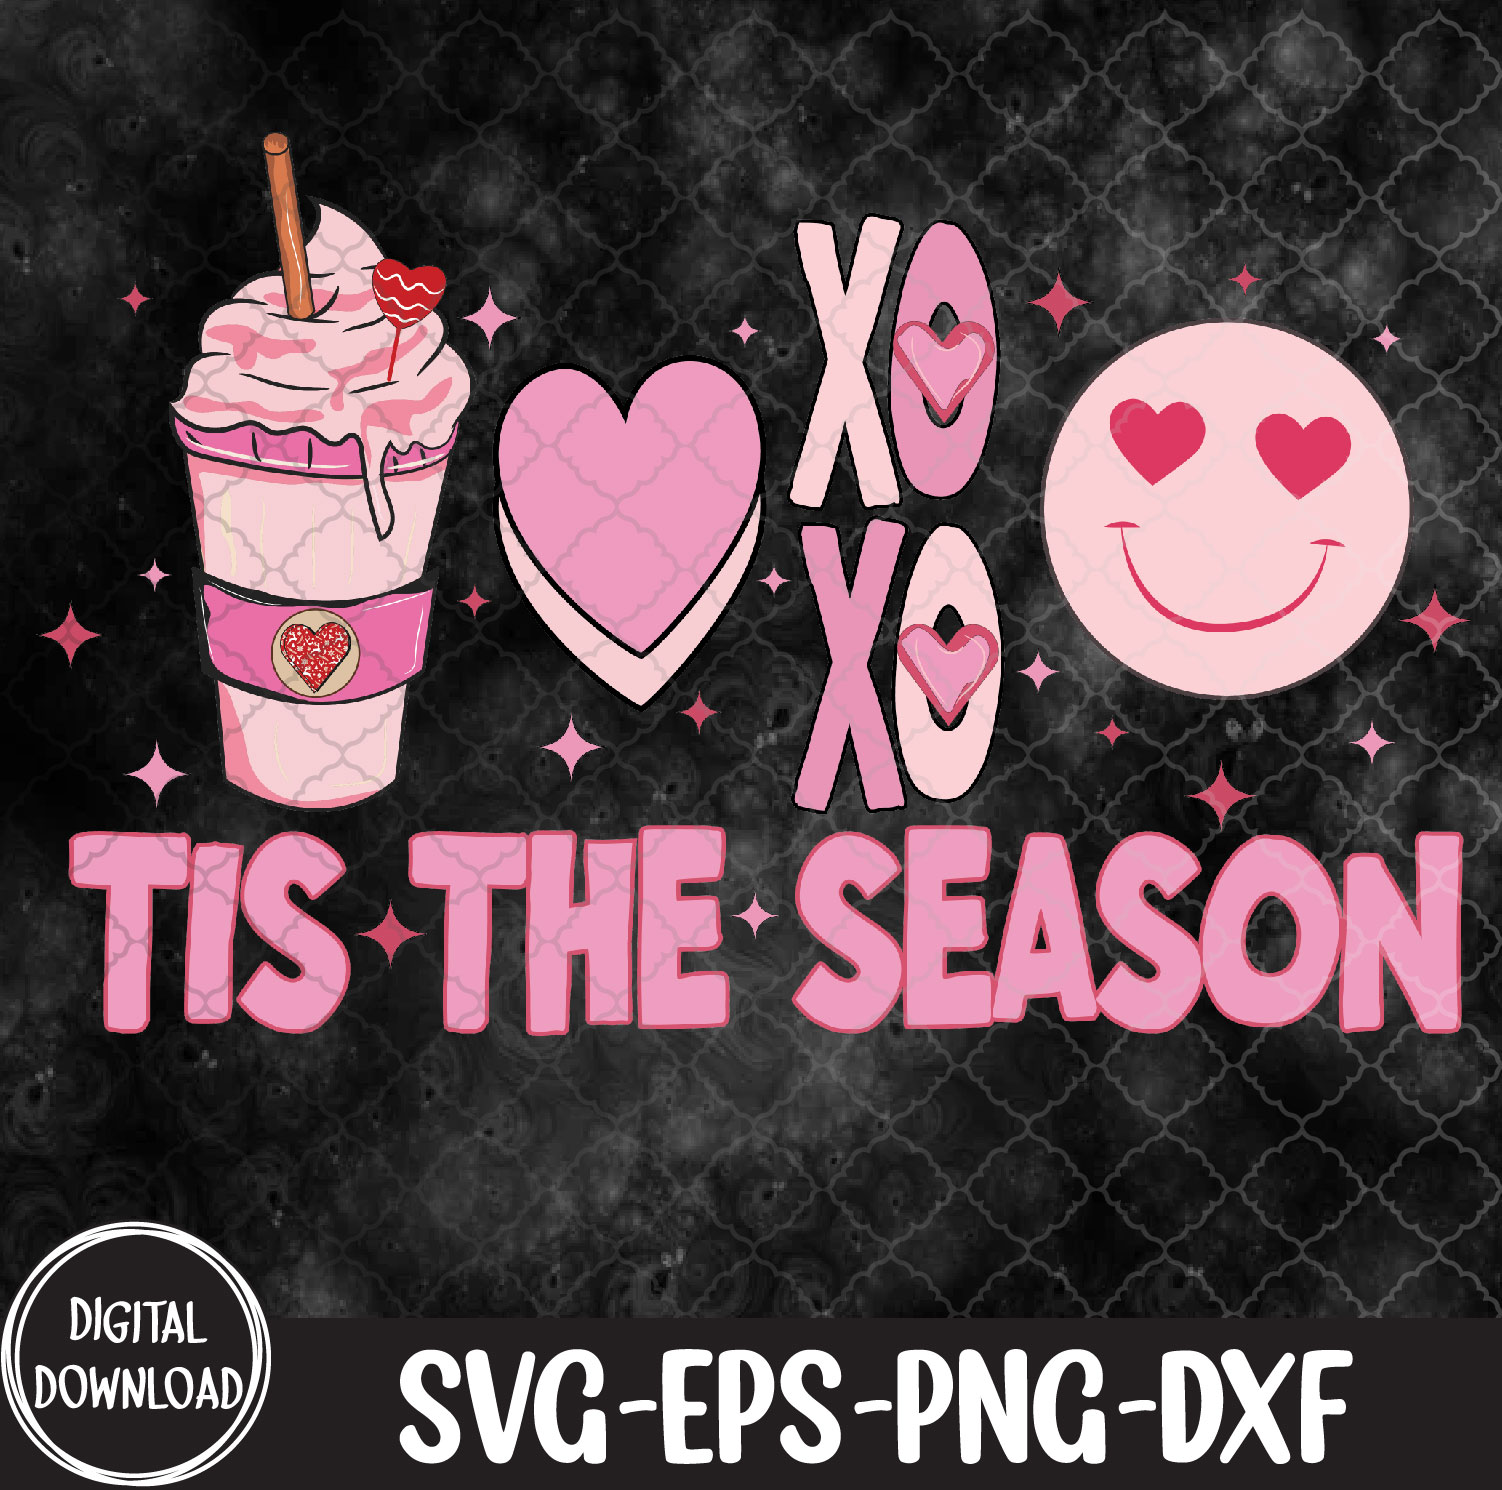 WTMNEW1512 09 22 Tis the Season Valentines Day Coffee Latte Heart XoXo, Valentines Day svg, Svg, Eps, Png, Dxf